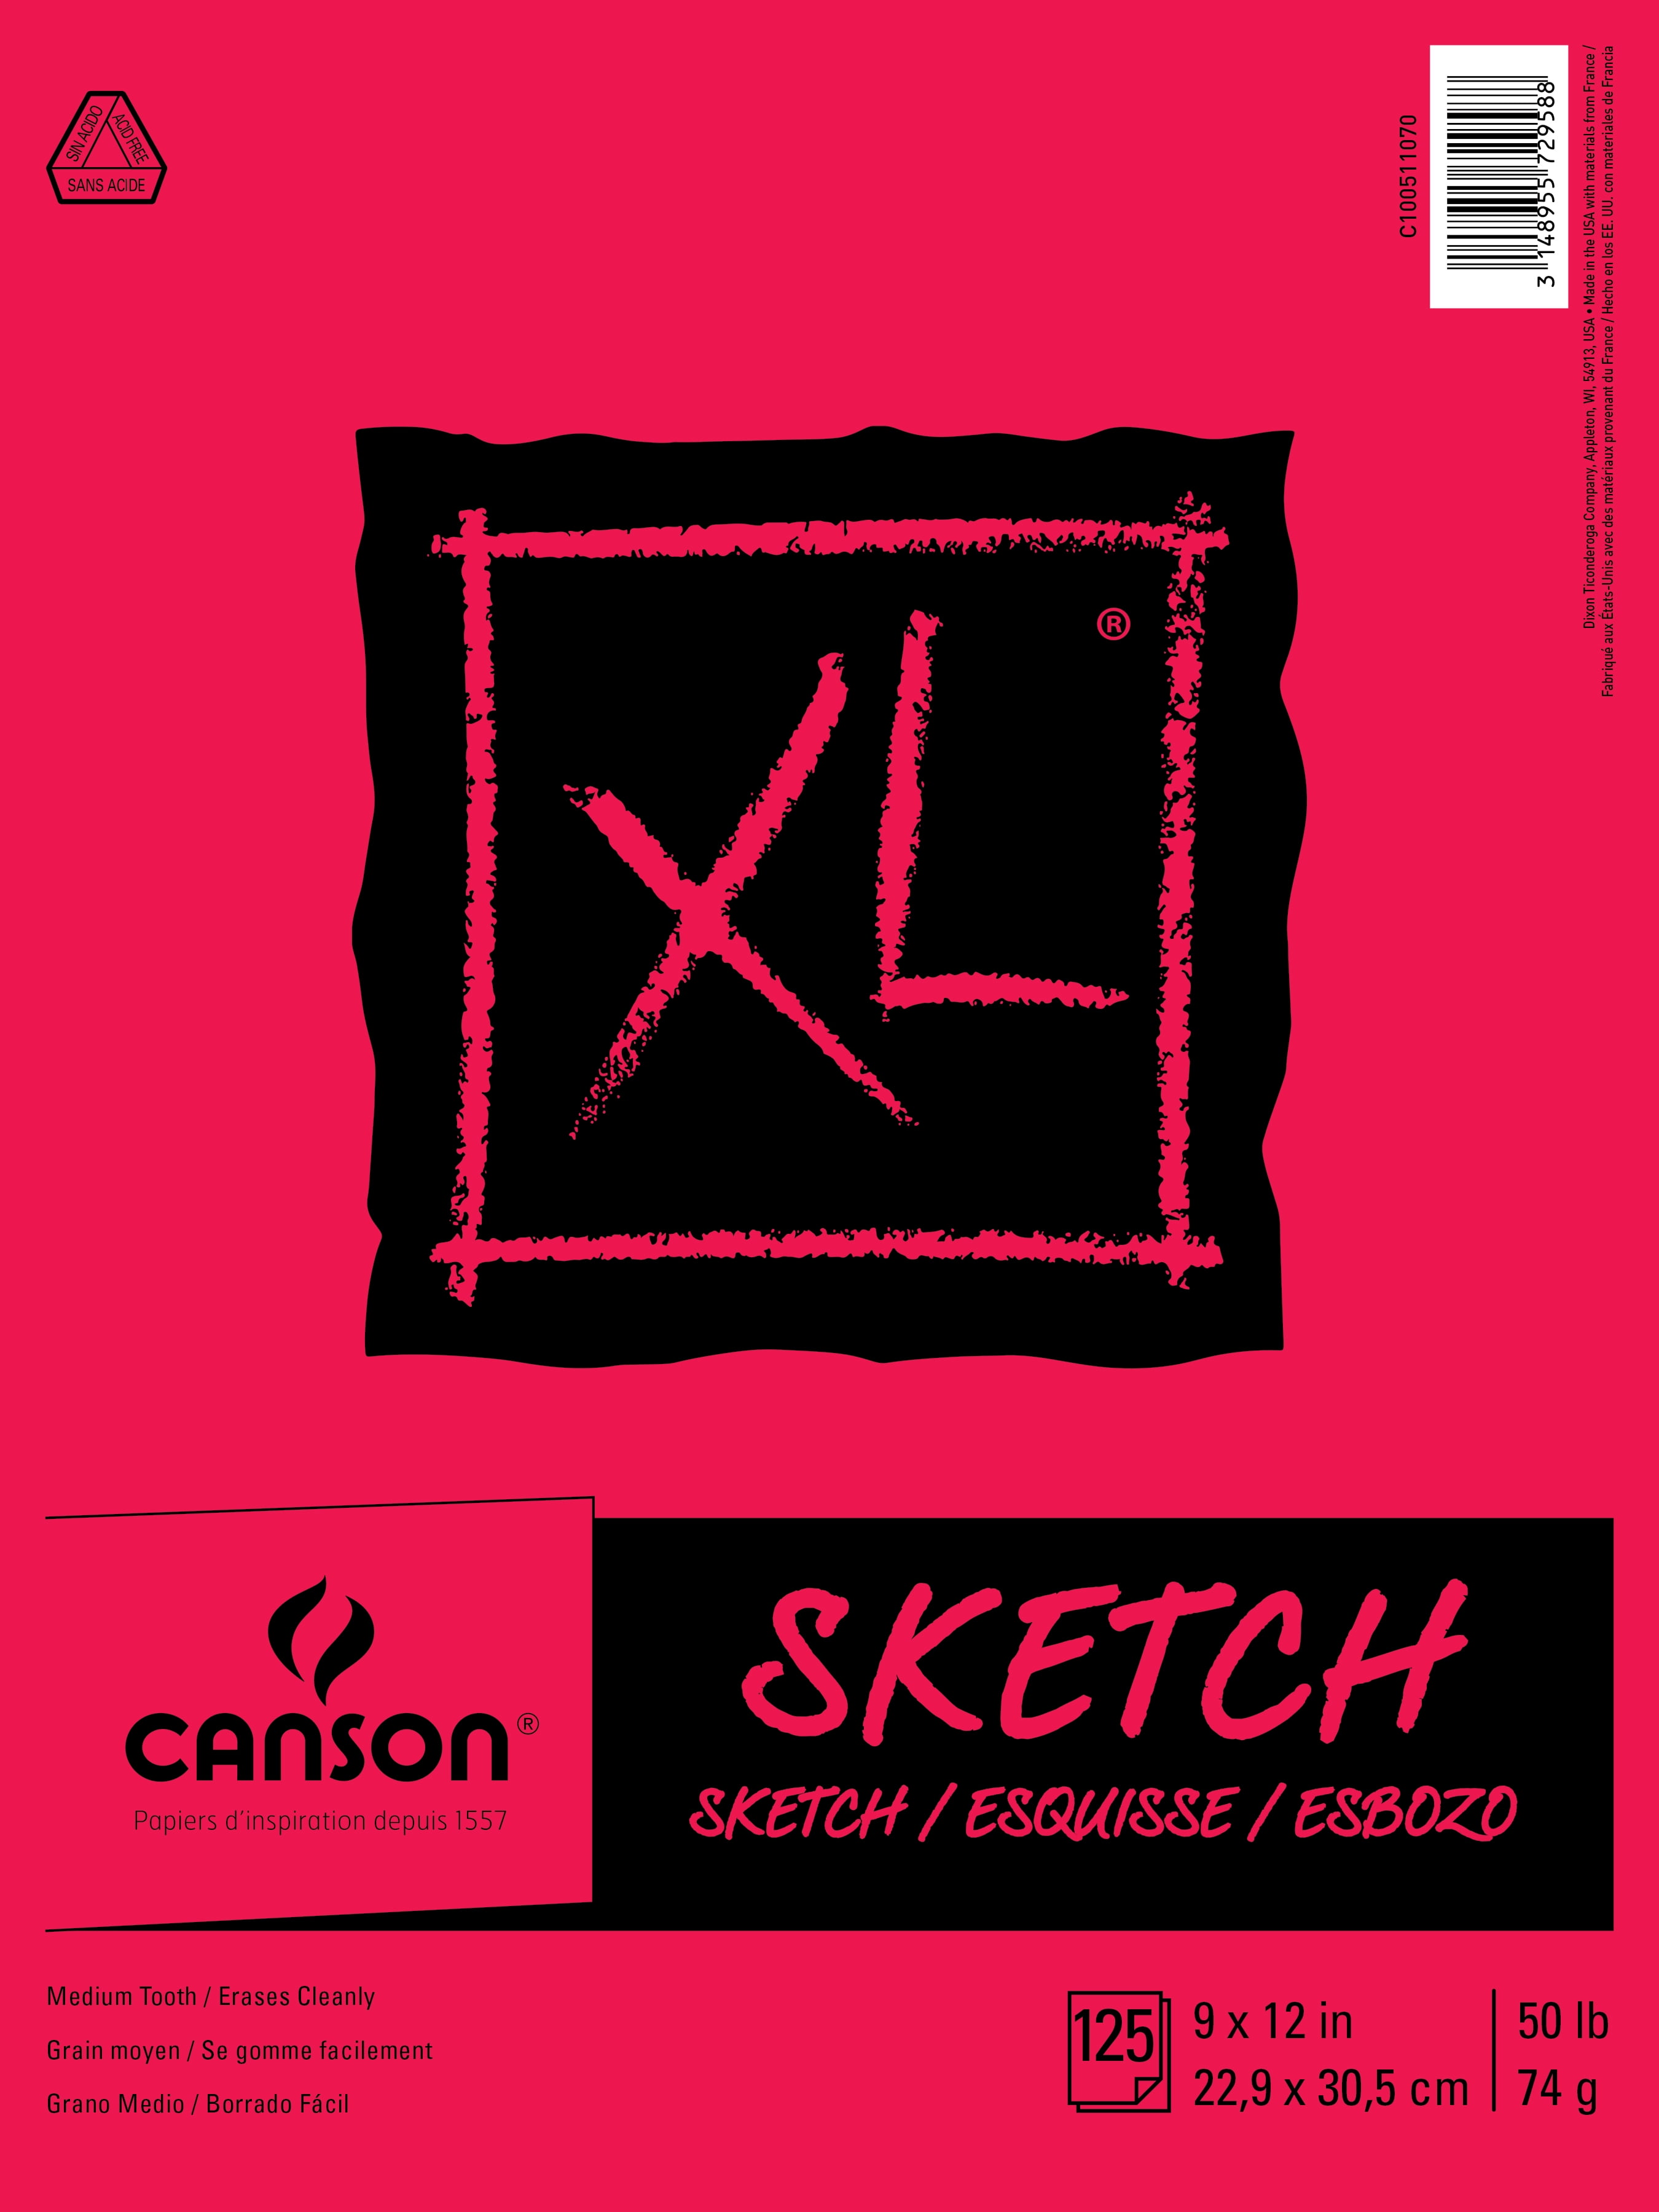 Canson XL Drawing Pad, 9” x 12” - The Art Store/Commercial Art Supply